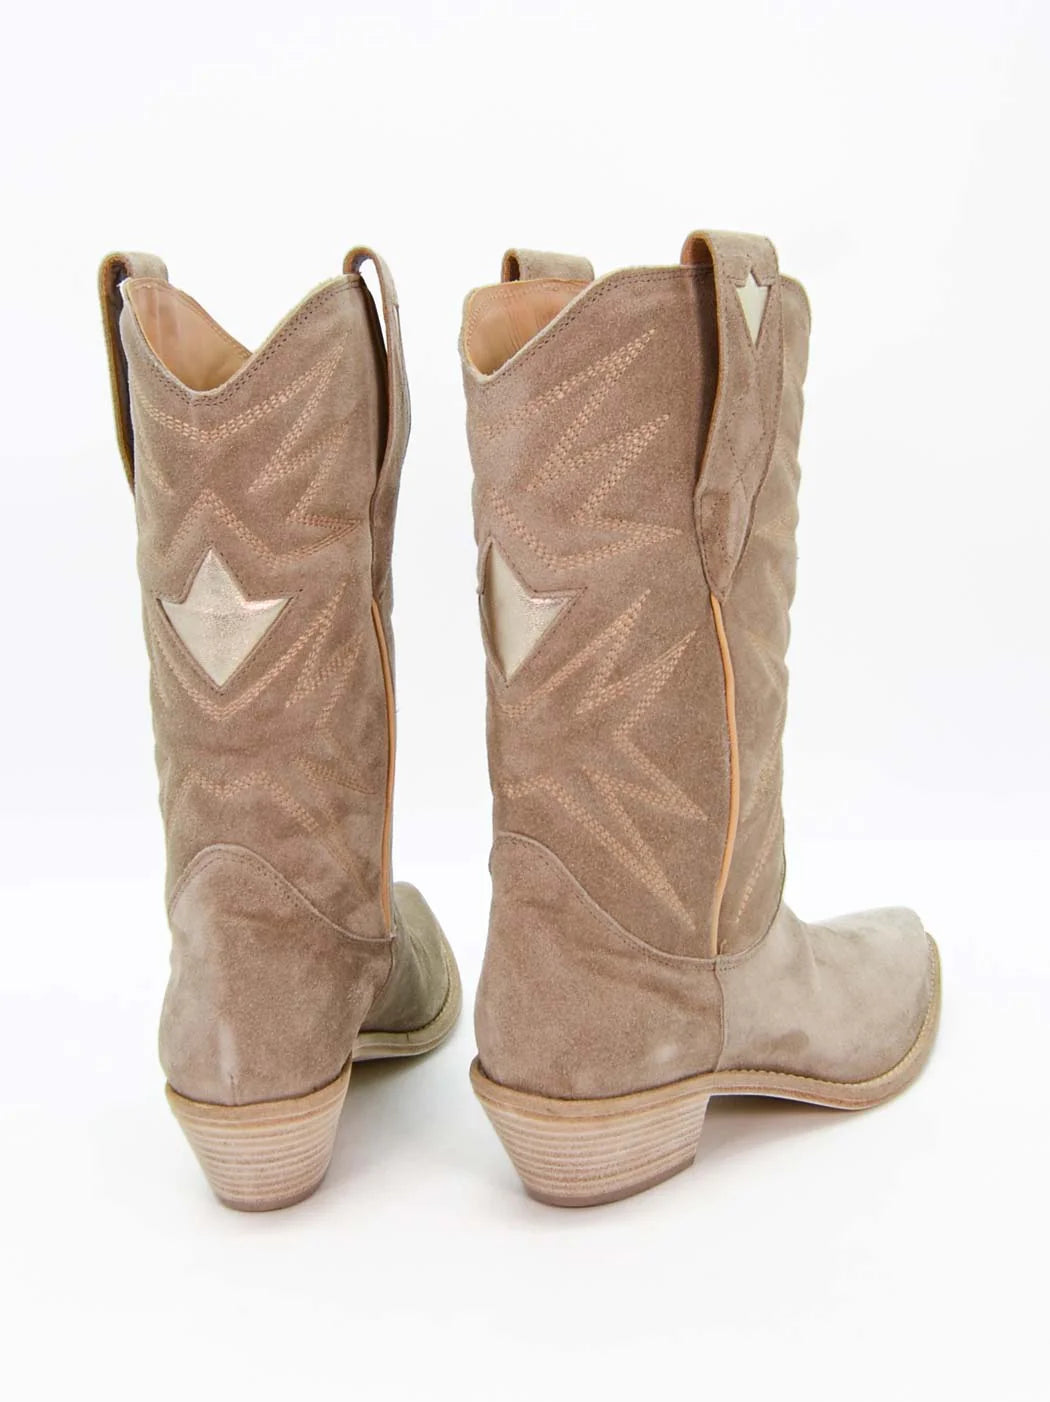 Western Cowboy Boots in Brown Crust Leather